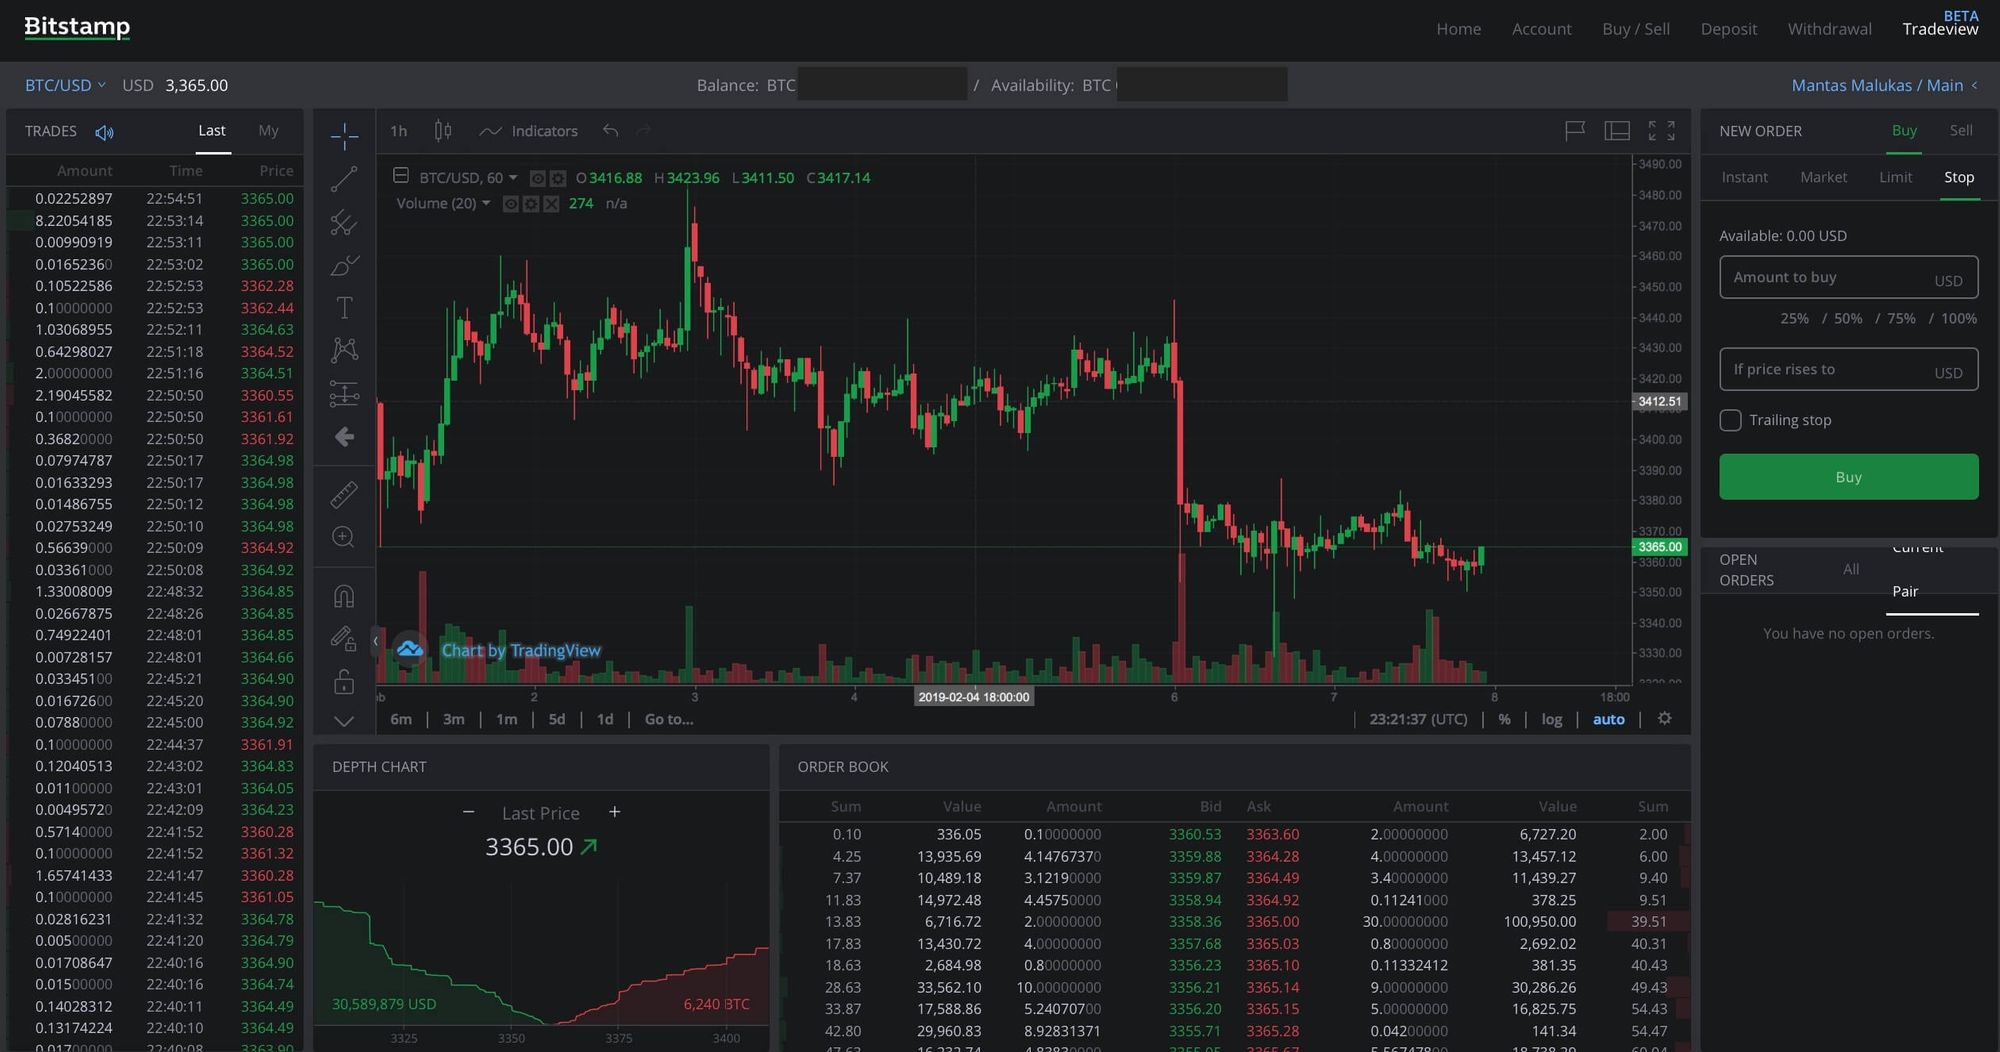 Bitstamp trading interface overview.